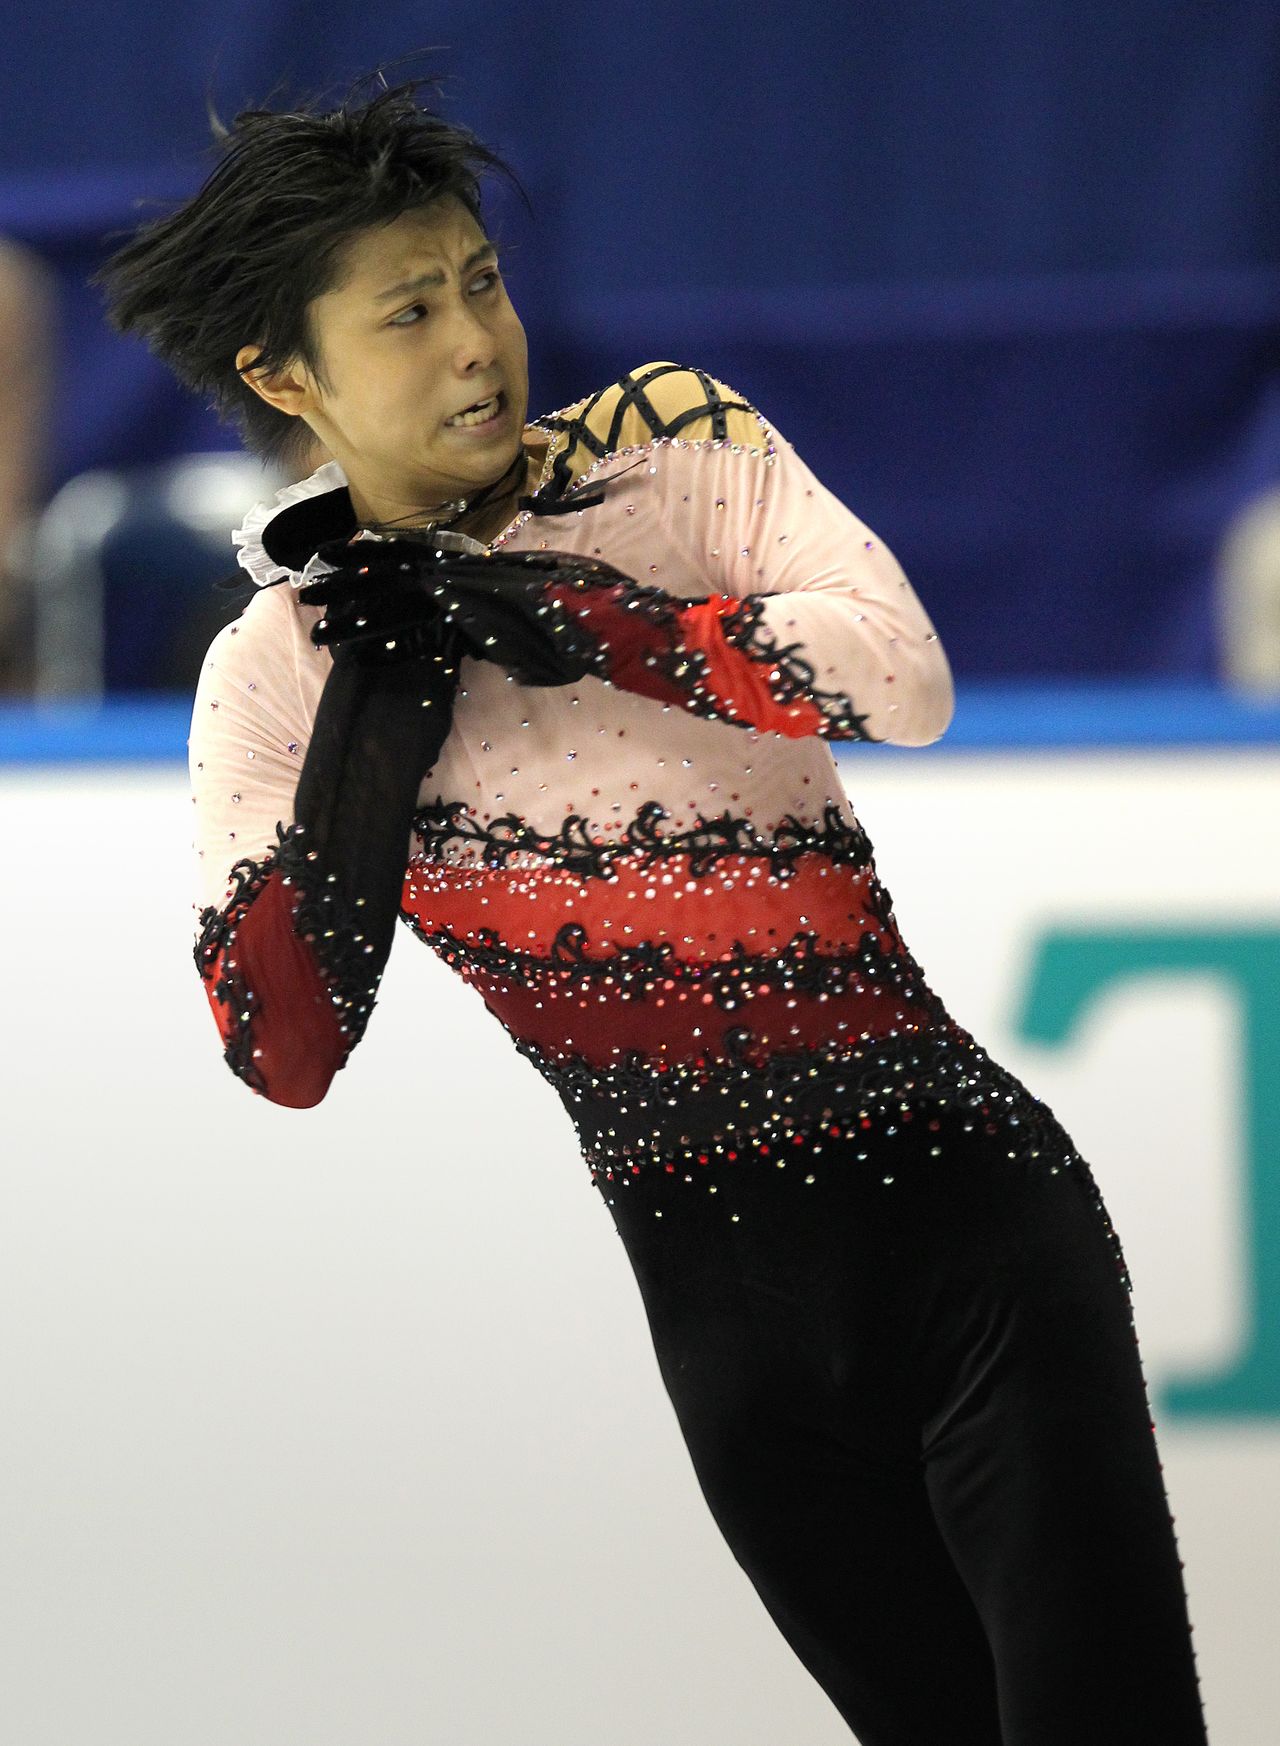 A 15-year-old Hanyū Yuzuru making his senior debut in the free skating at the Grand Prix NHK Trophy at the NGK Arena in Aichi Prefecture on October 24, 2010. (© Jiji)